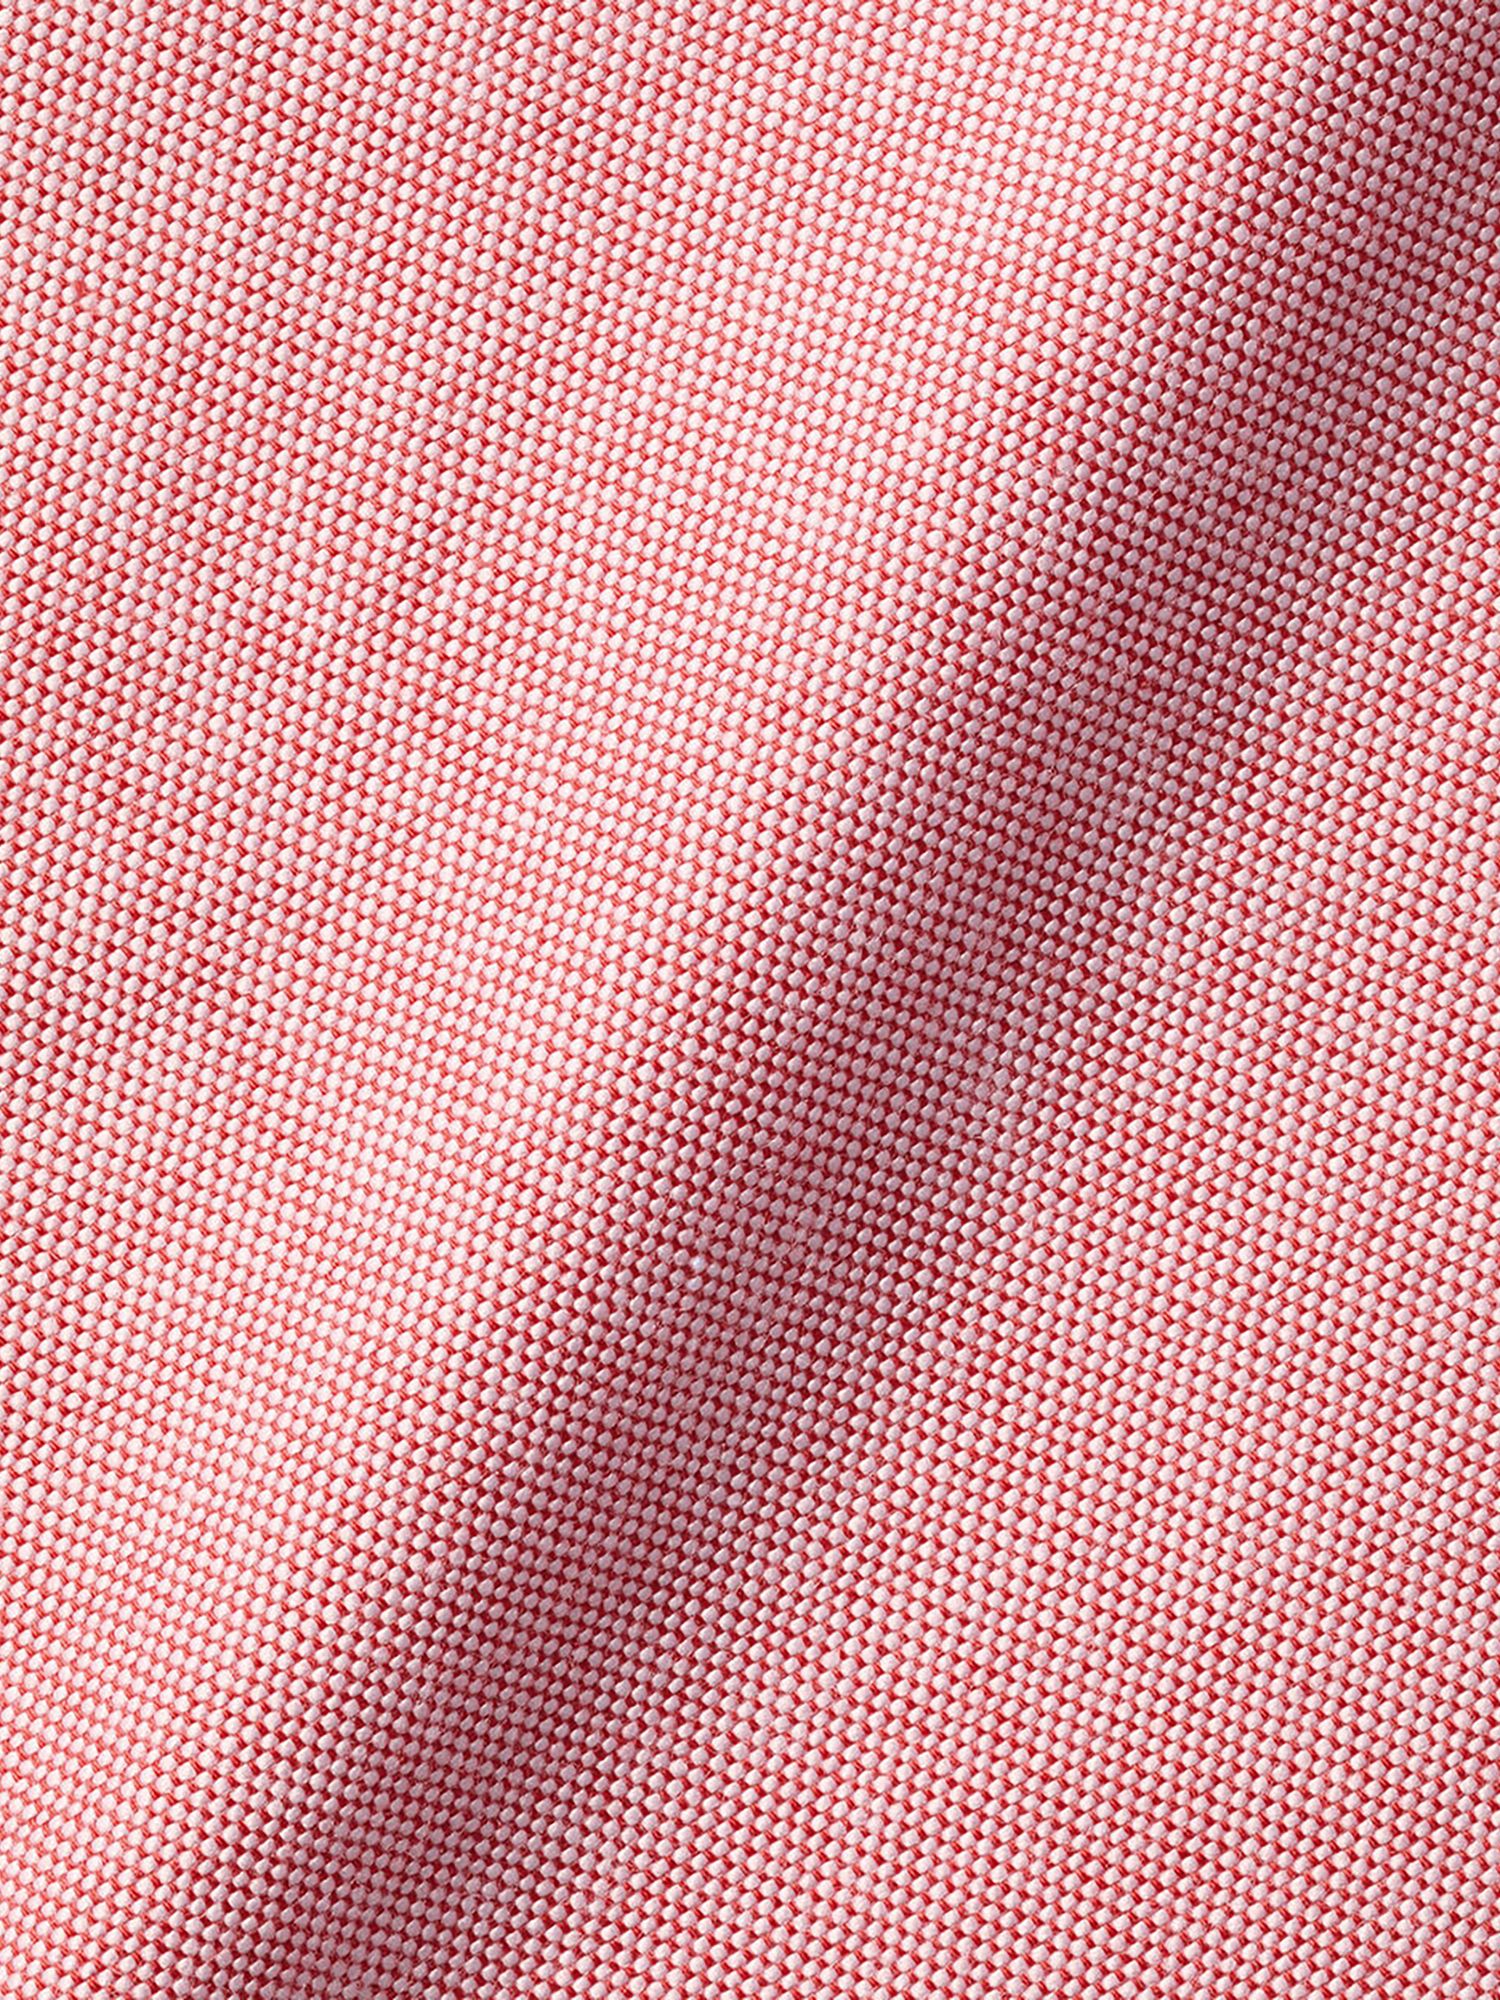 Charles Tyrwhitt Plain Short Sleeve Button Down Stretch Washed Oxford Shirt, Coral Pink, M